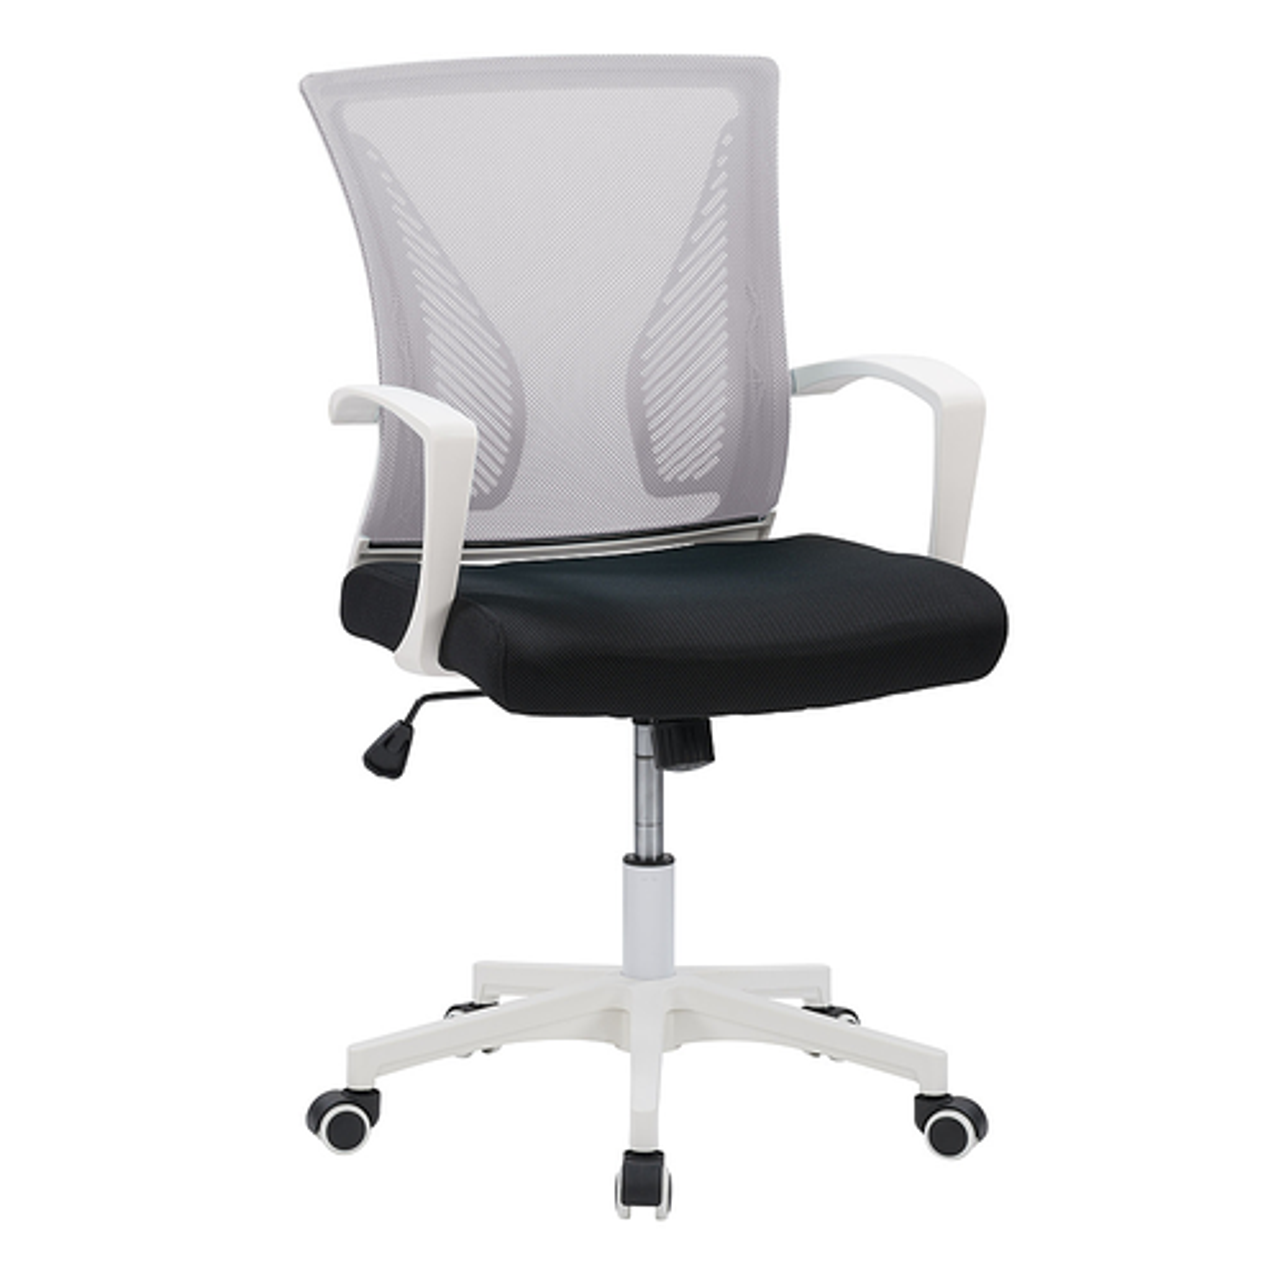 CorLiving Workspace Ergonomic Grey Mesh Back Office Chair - Grey and White